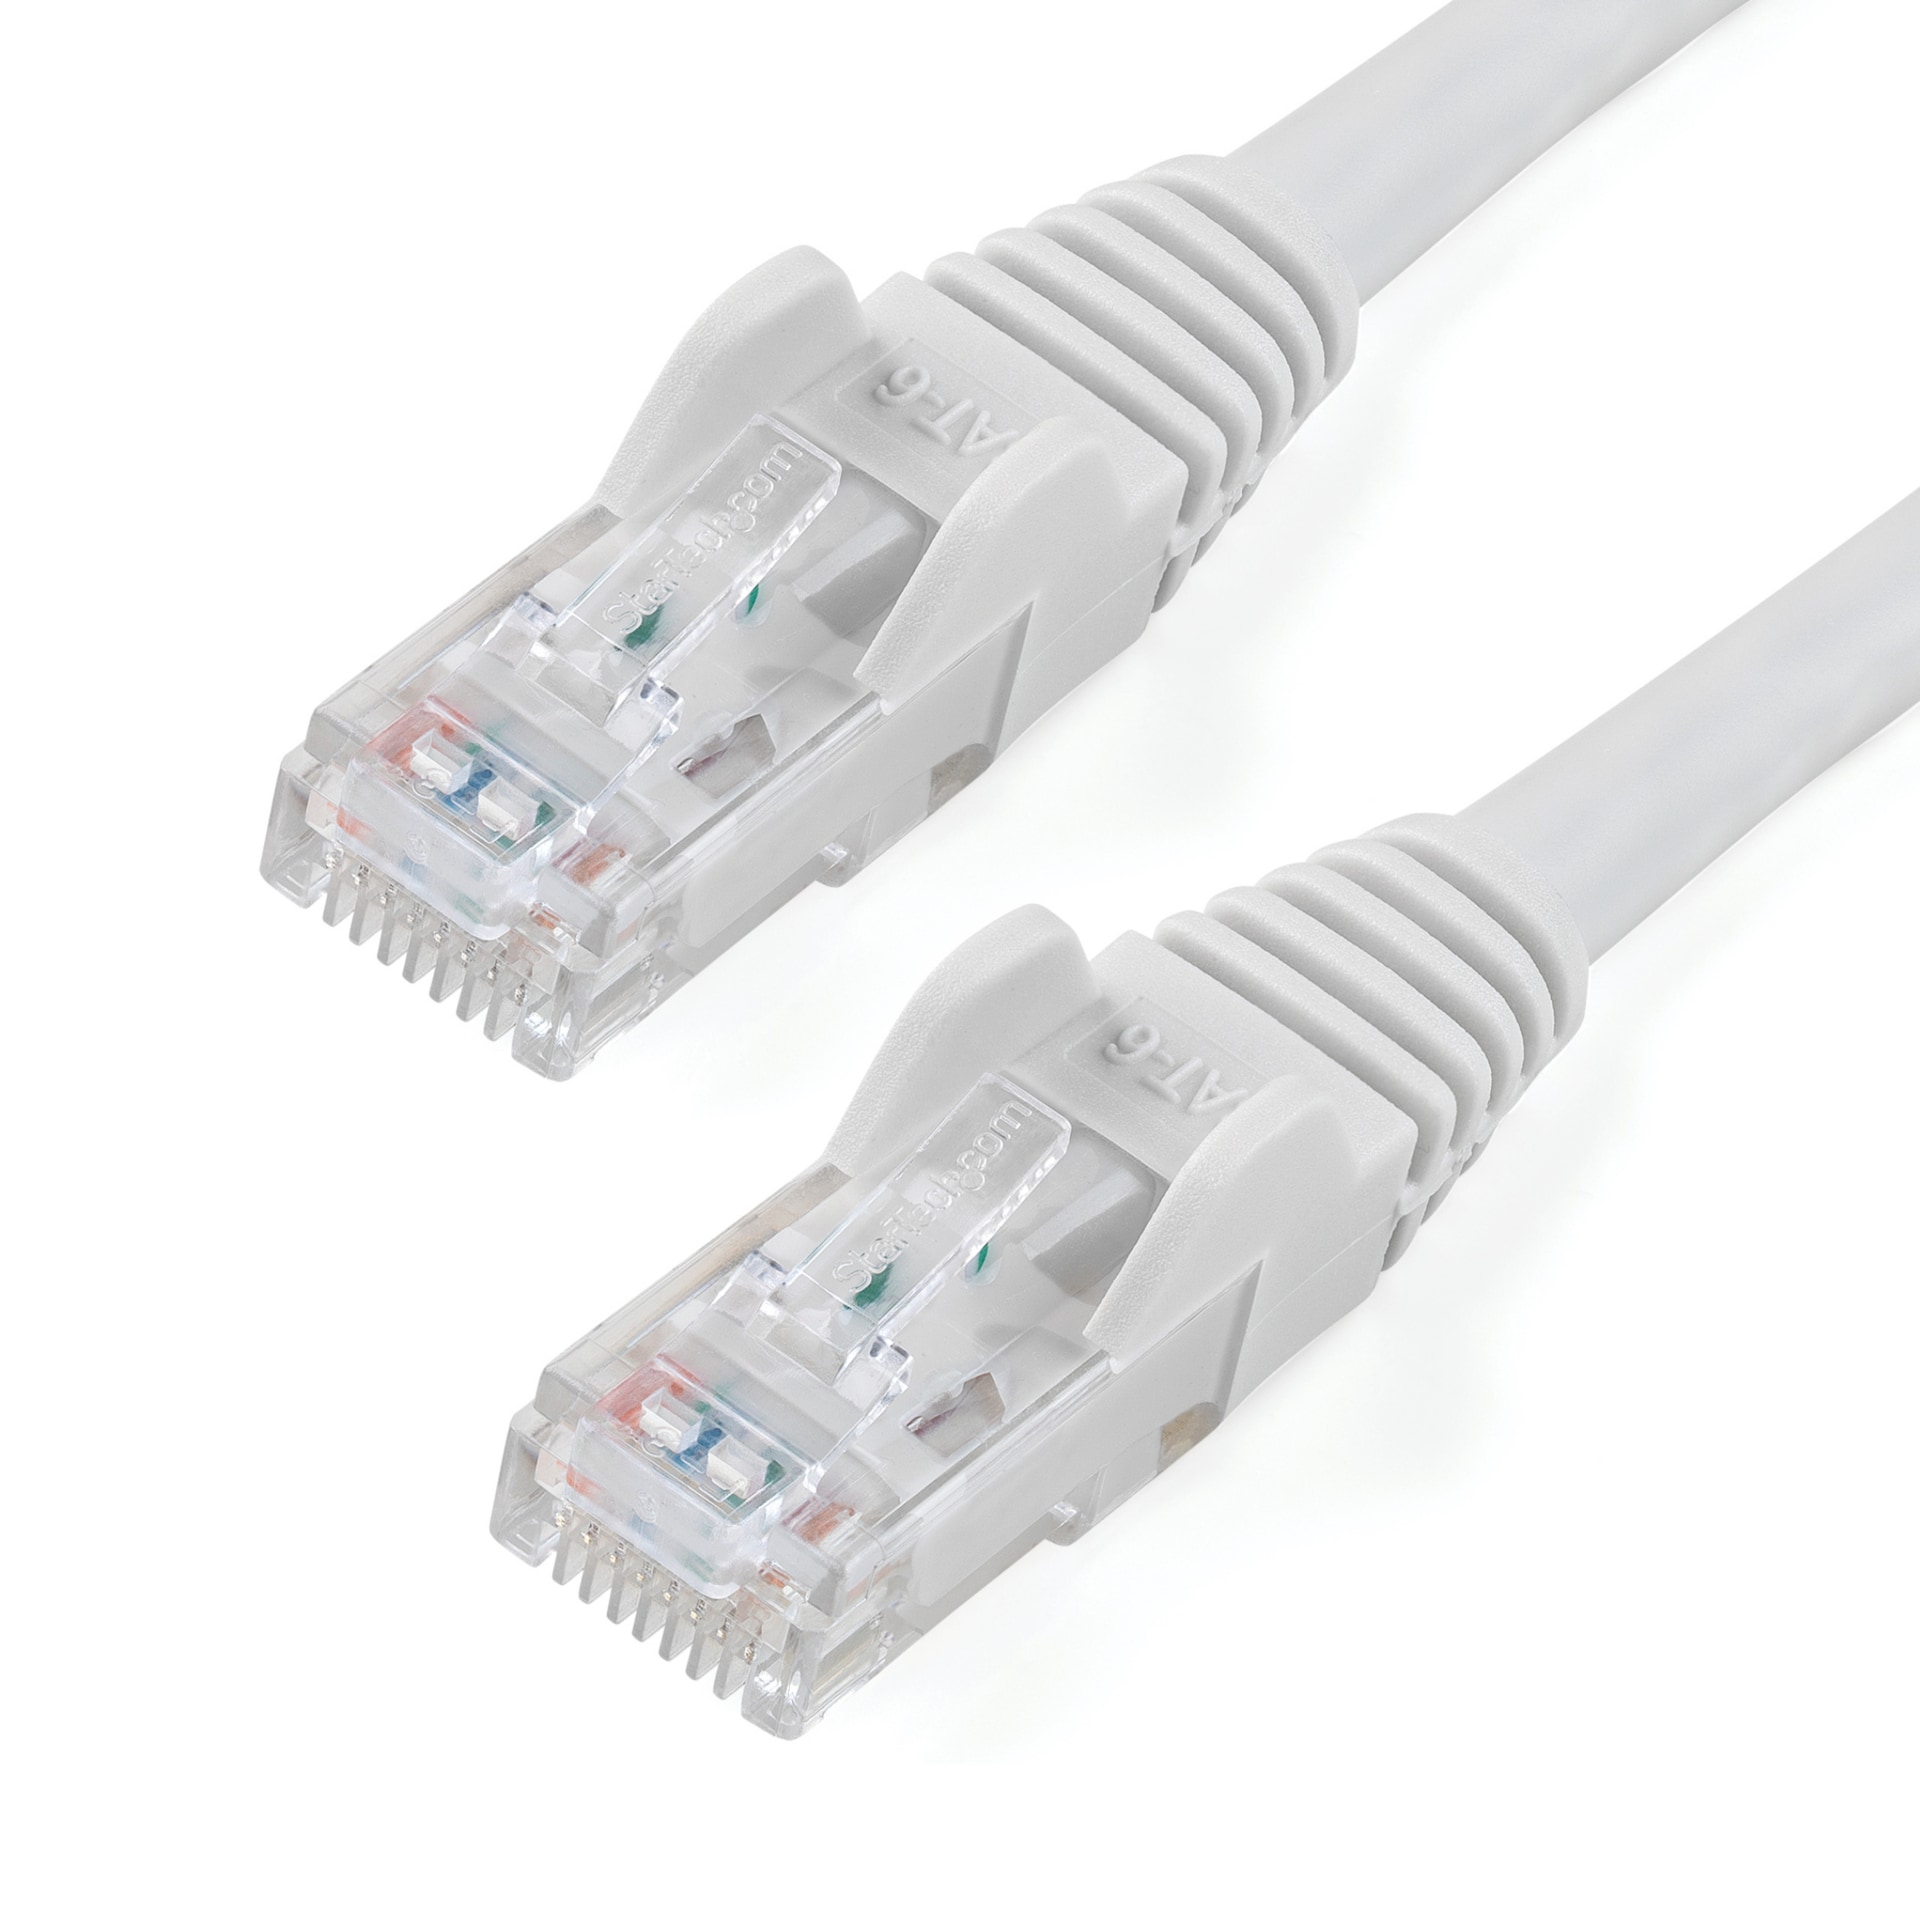 StarTech.com CAT6 Ethernet Cable 15' White 650MHz PoE Snagless Patch Cord